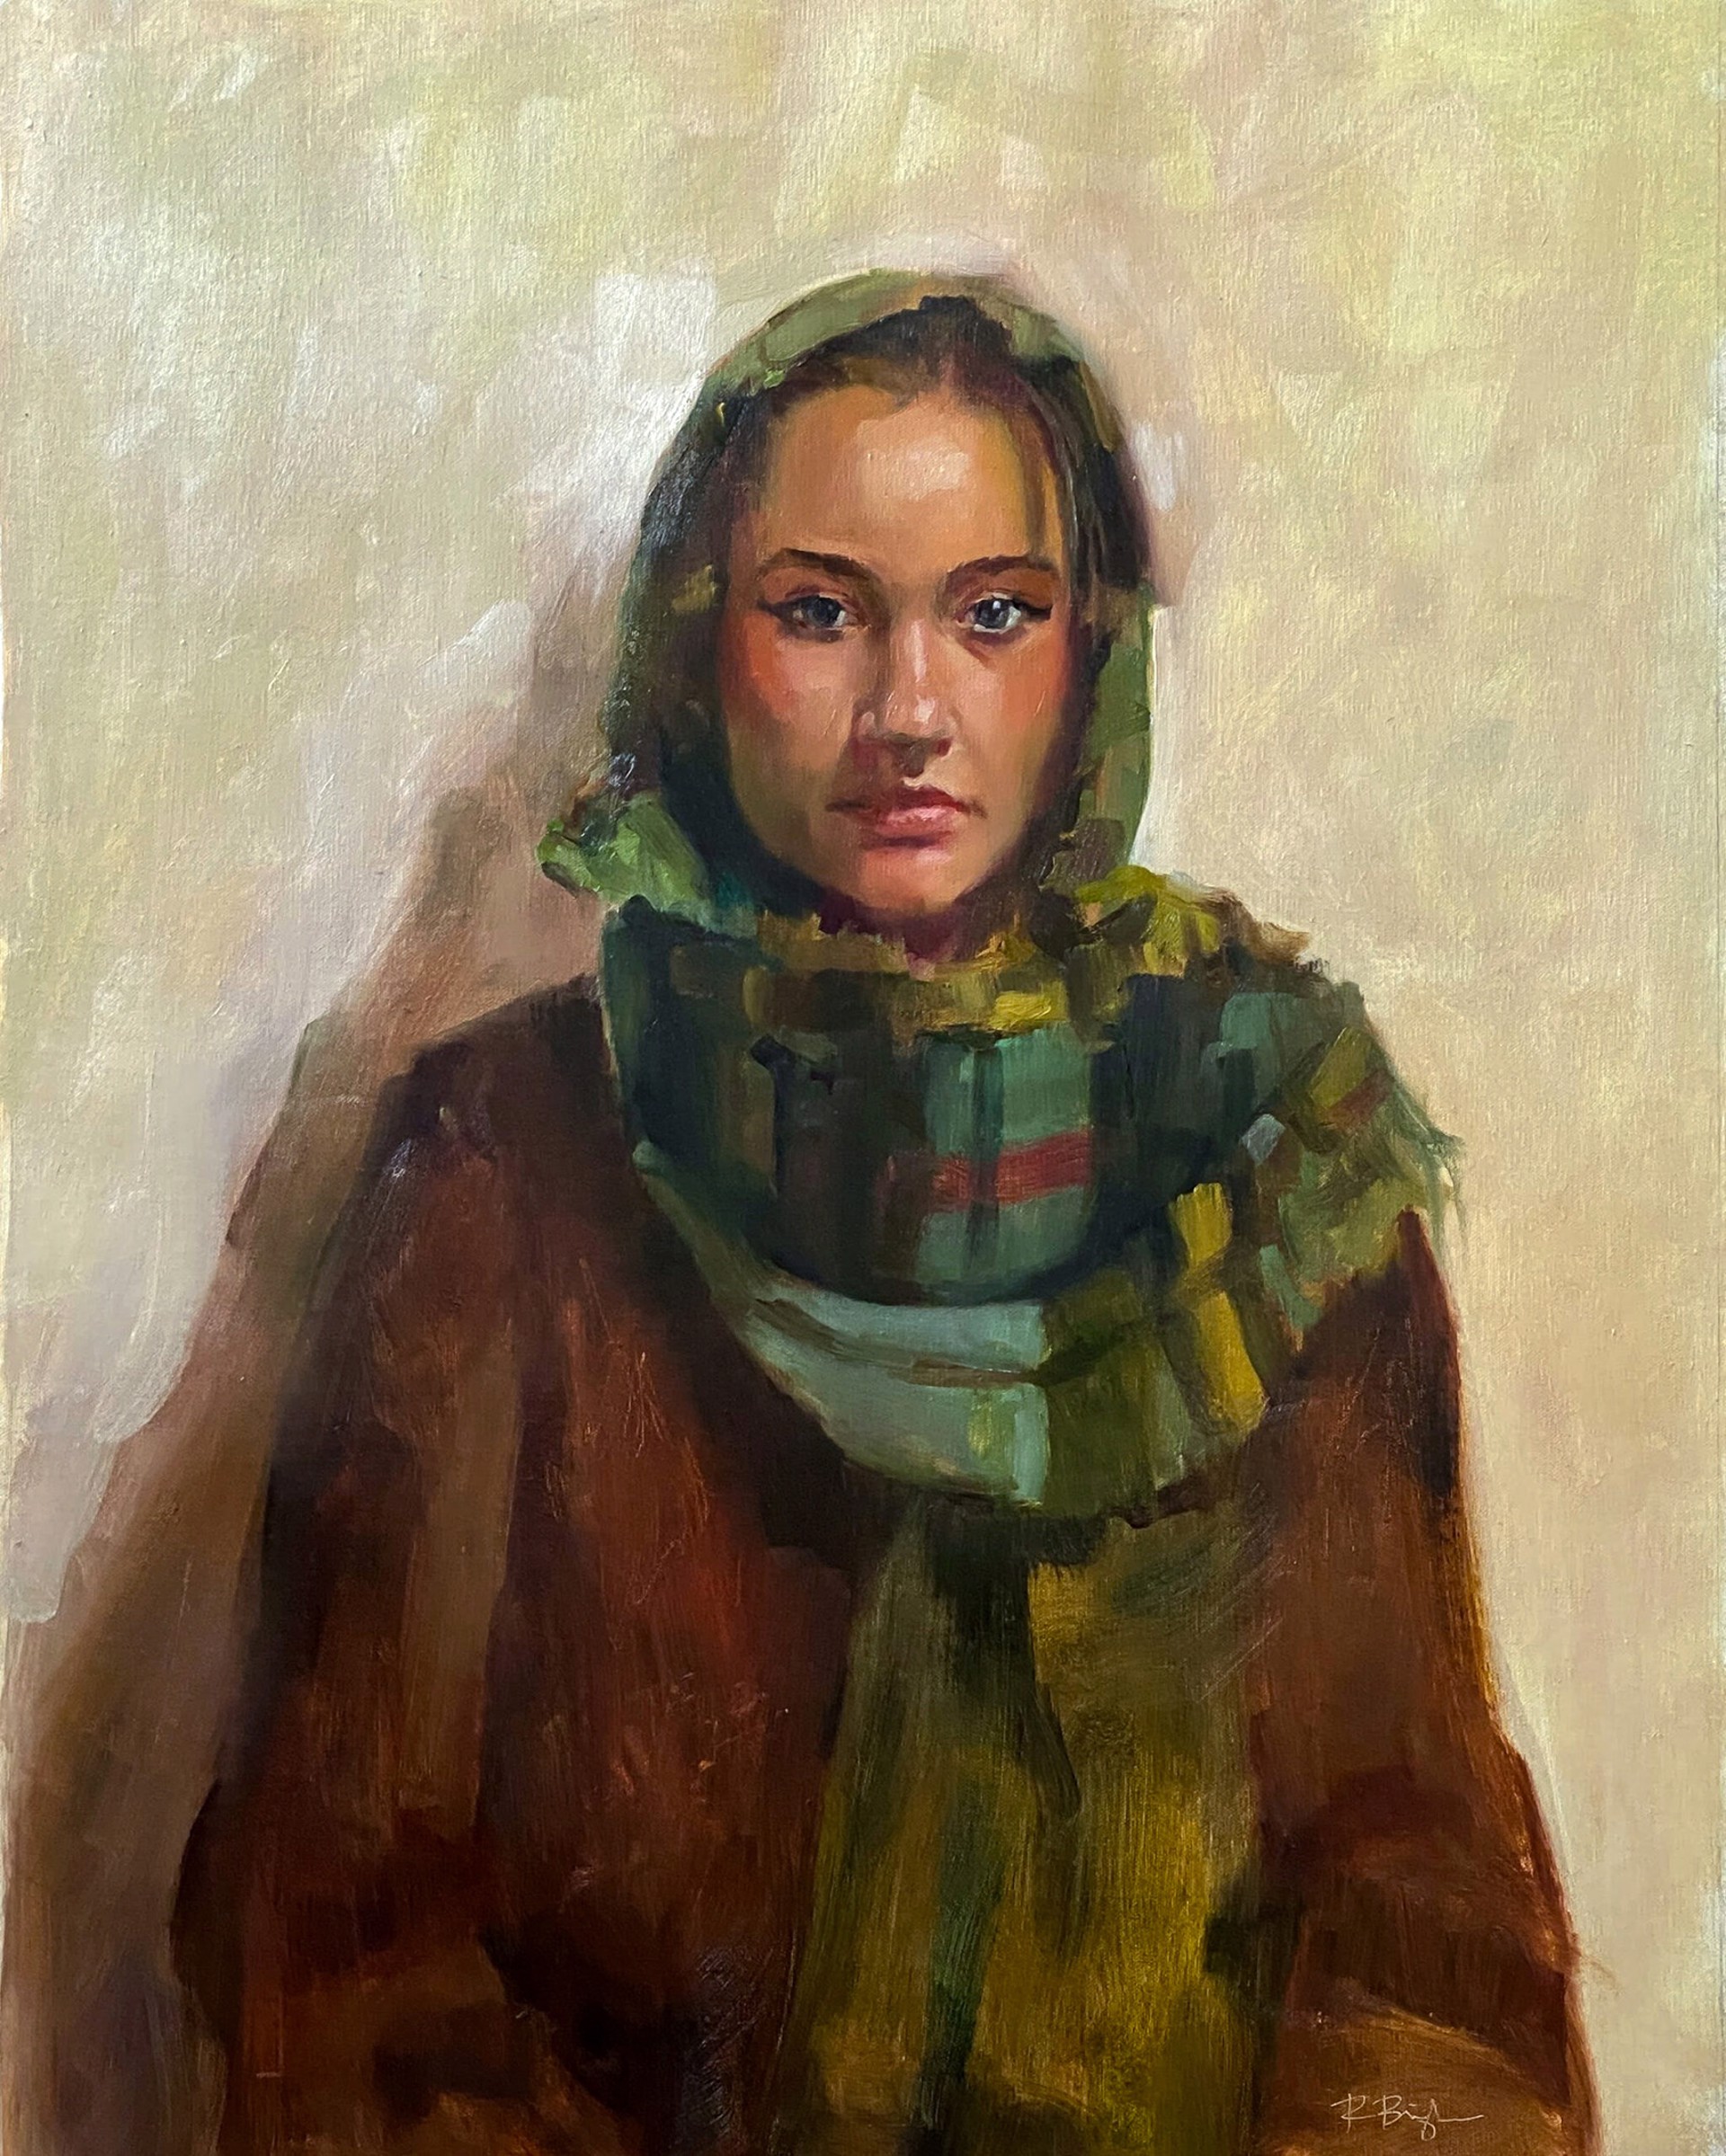 Robyn Bingham "Refugee" by Oil Painters of America